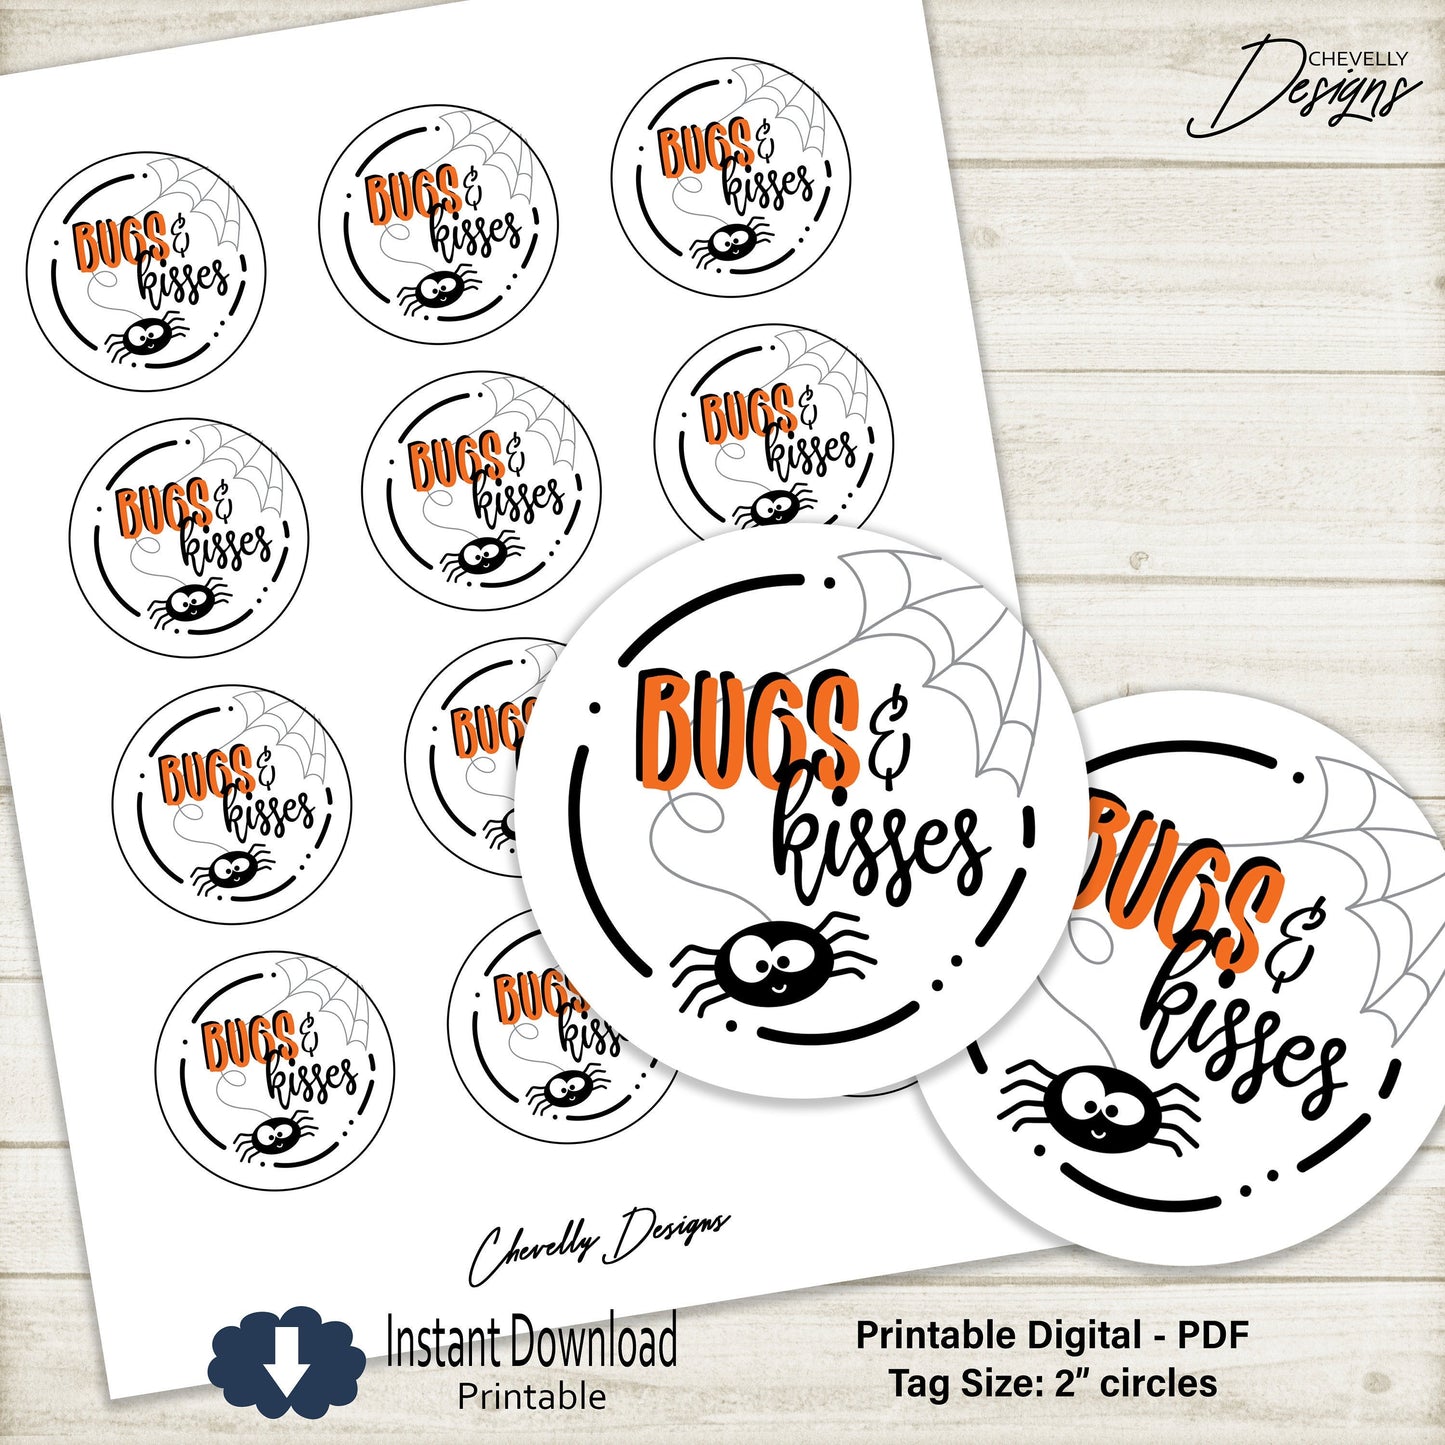 Printable 2 Inch Bugs and Kisses Circle Gift Tags for Hugs (bugs) and kisses| Instant Digital Download